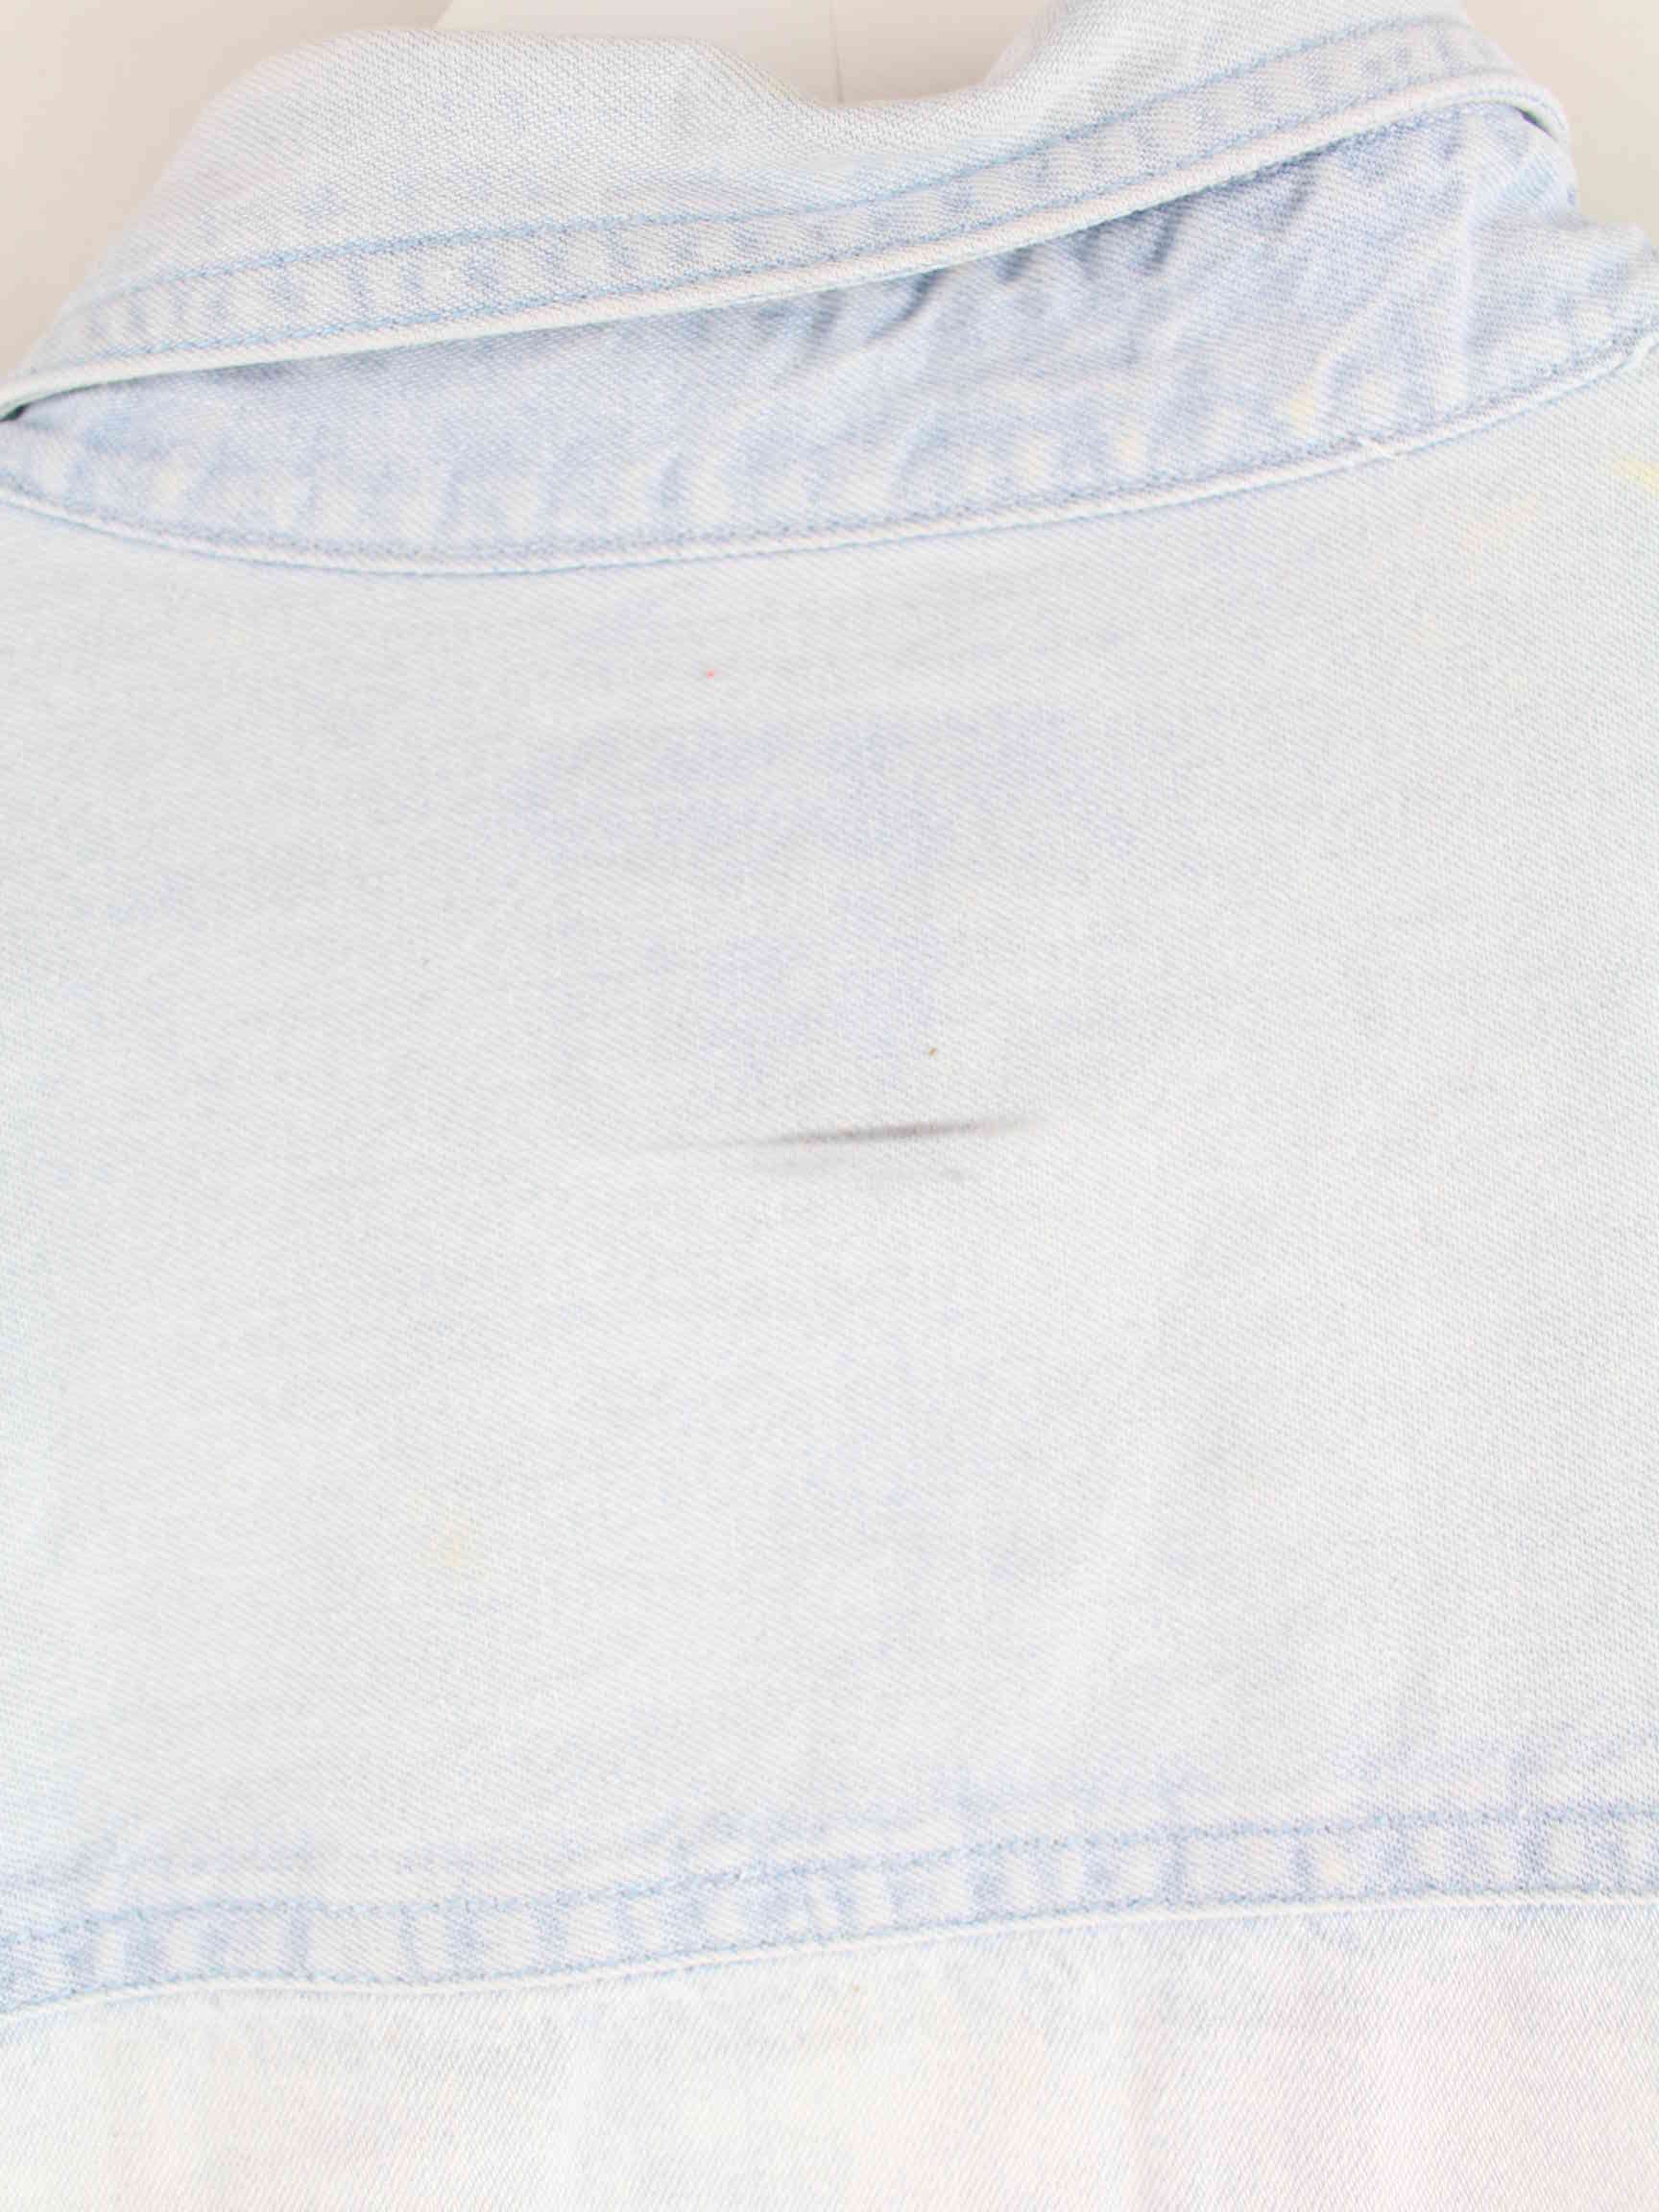 Lee Synergy Embroidered Jeans Hemd Blau XL (detail image 4)